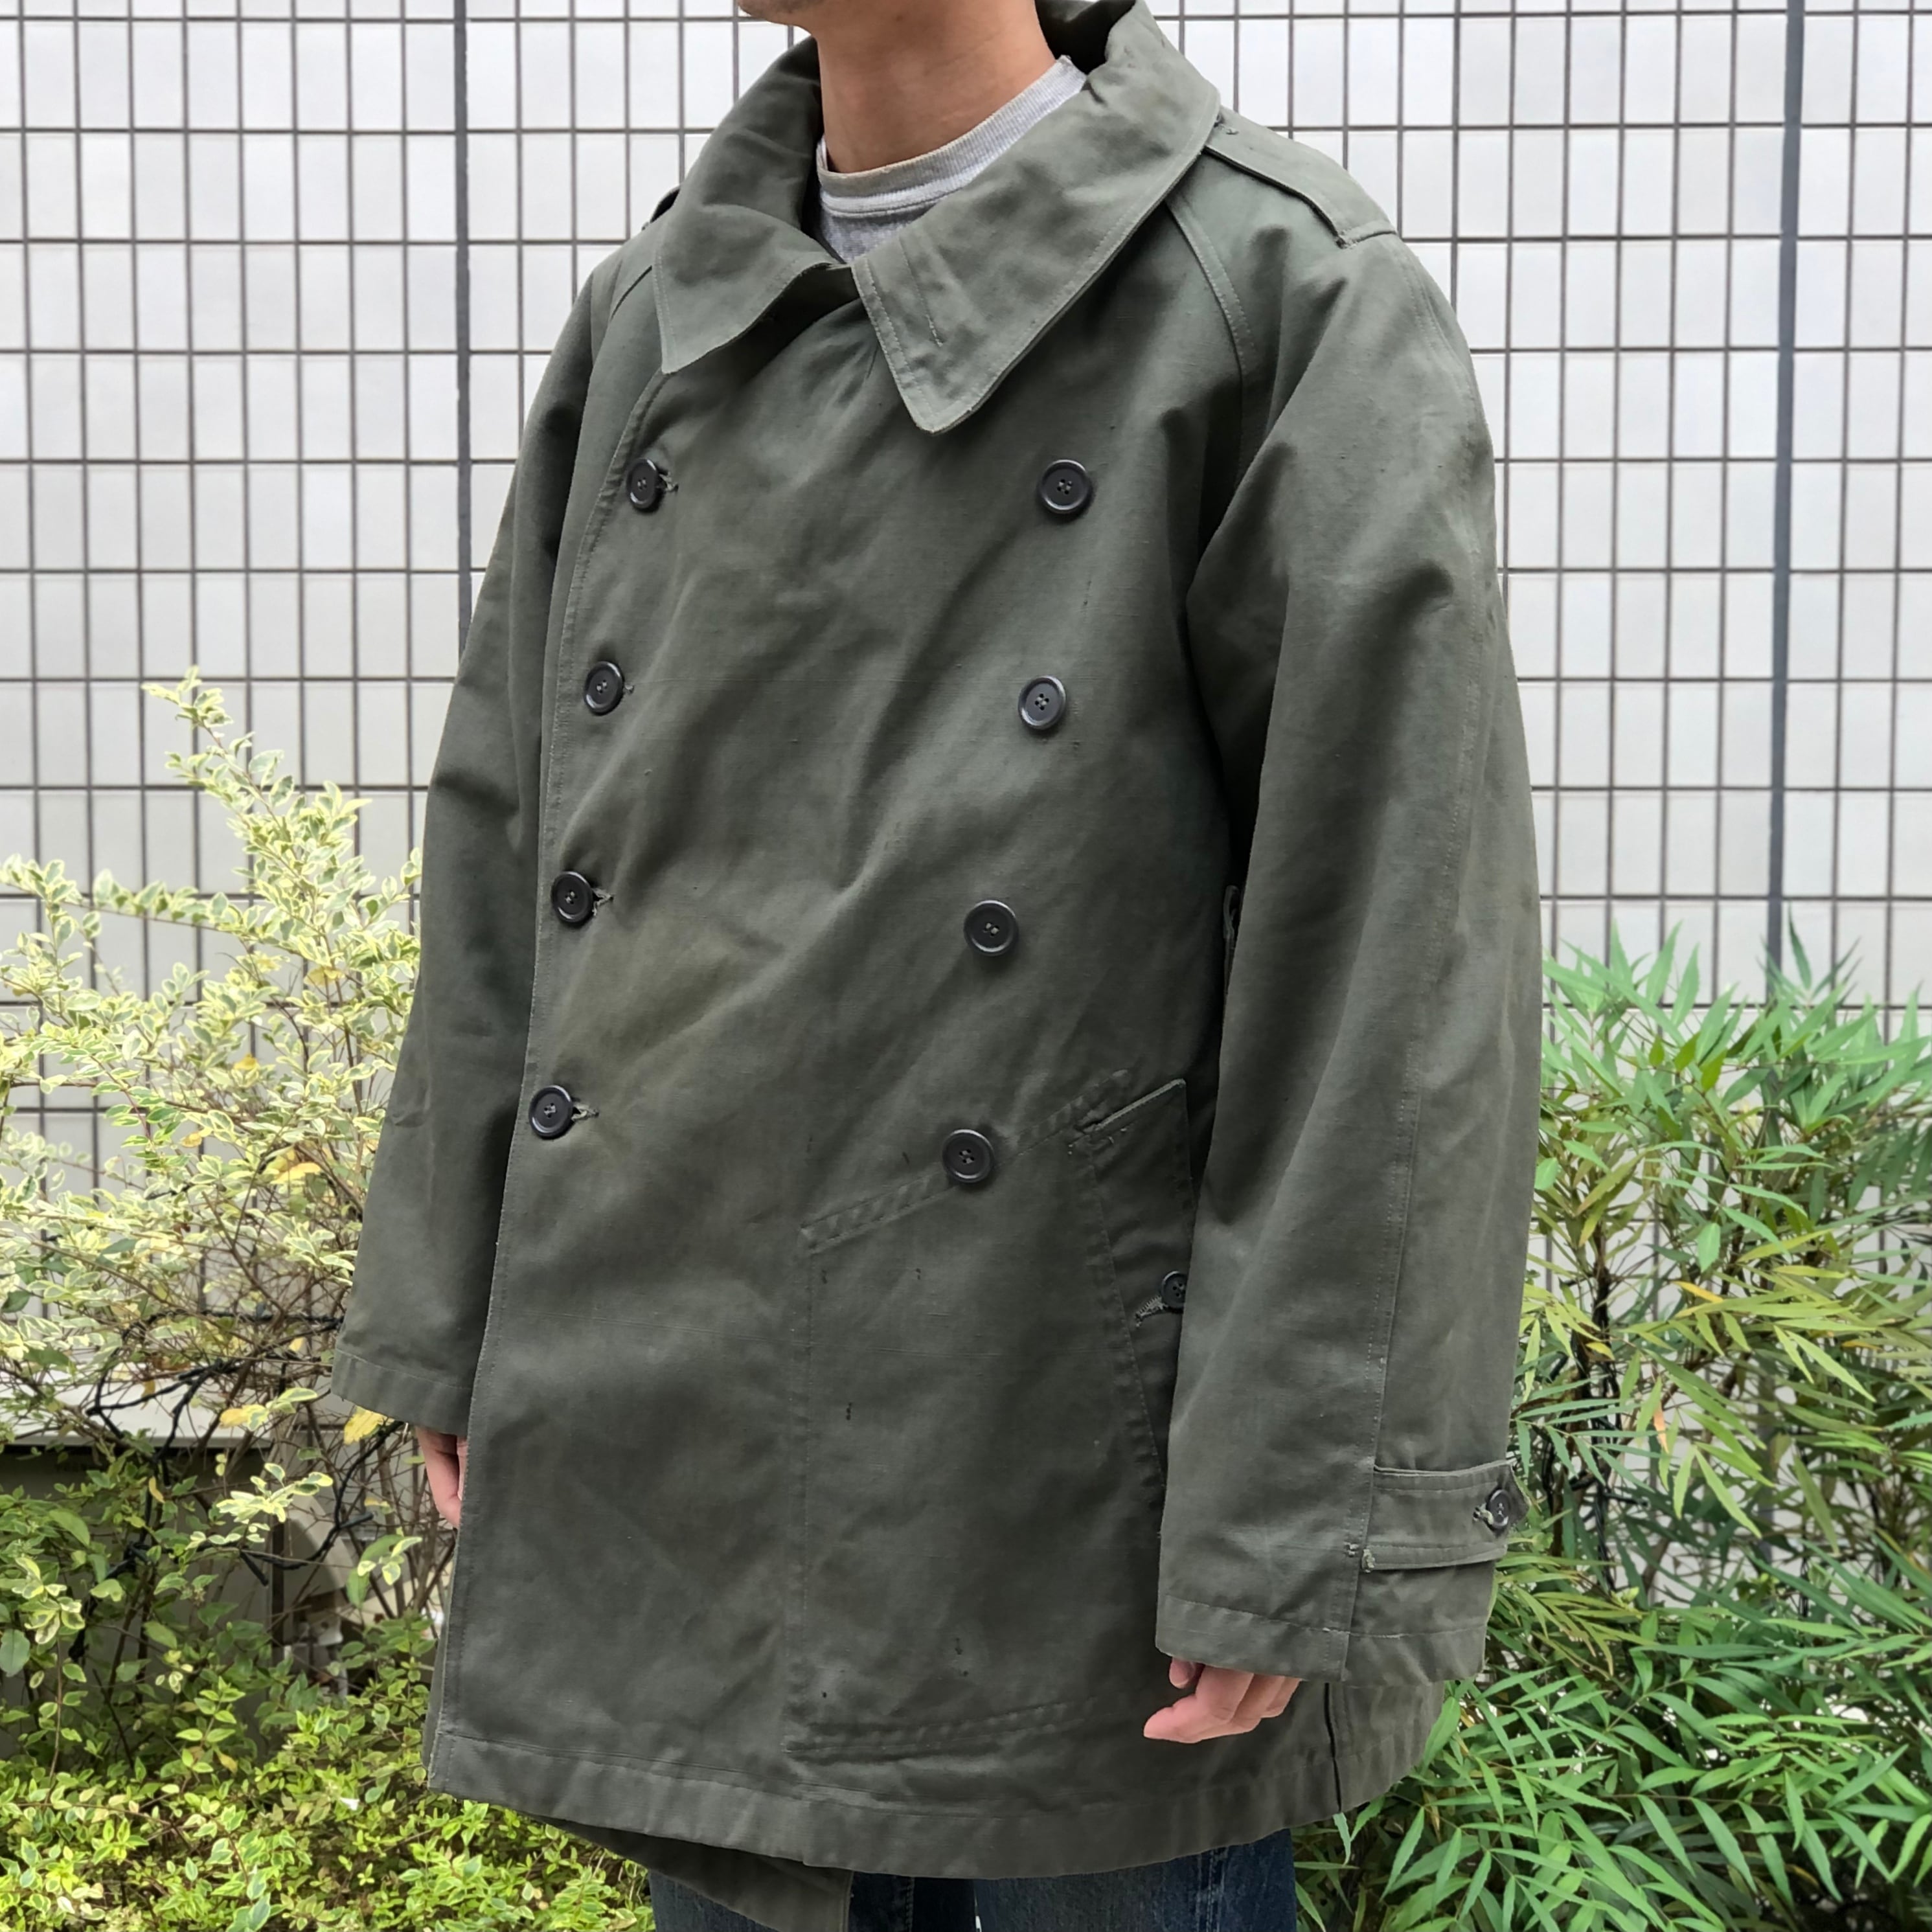 Dead stock M38 Motorcycle jacket フランス軍 モーターサイクル